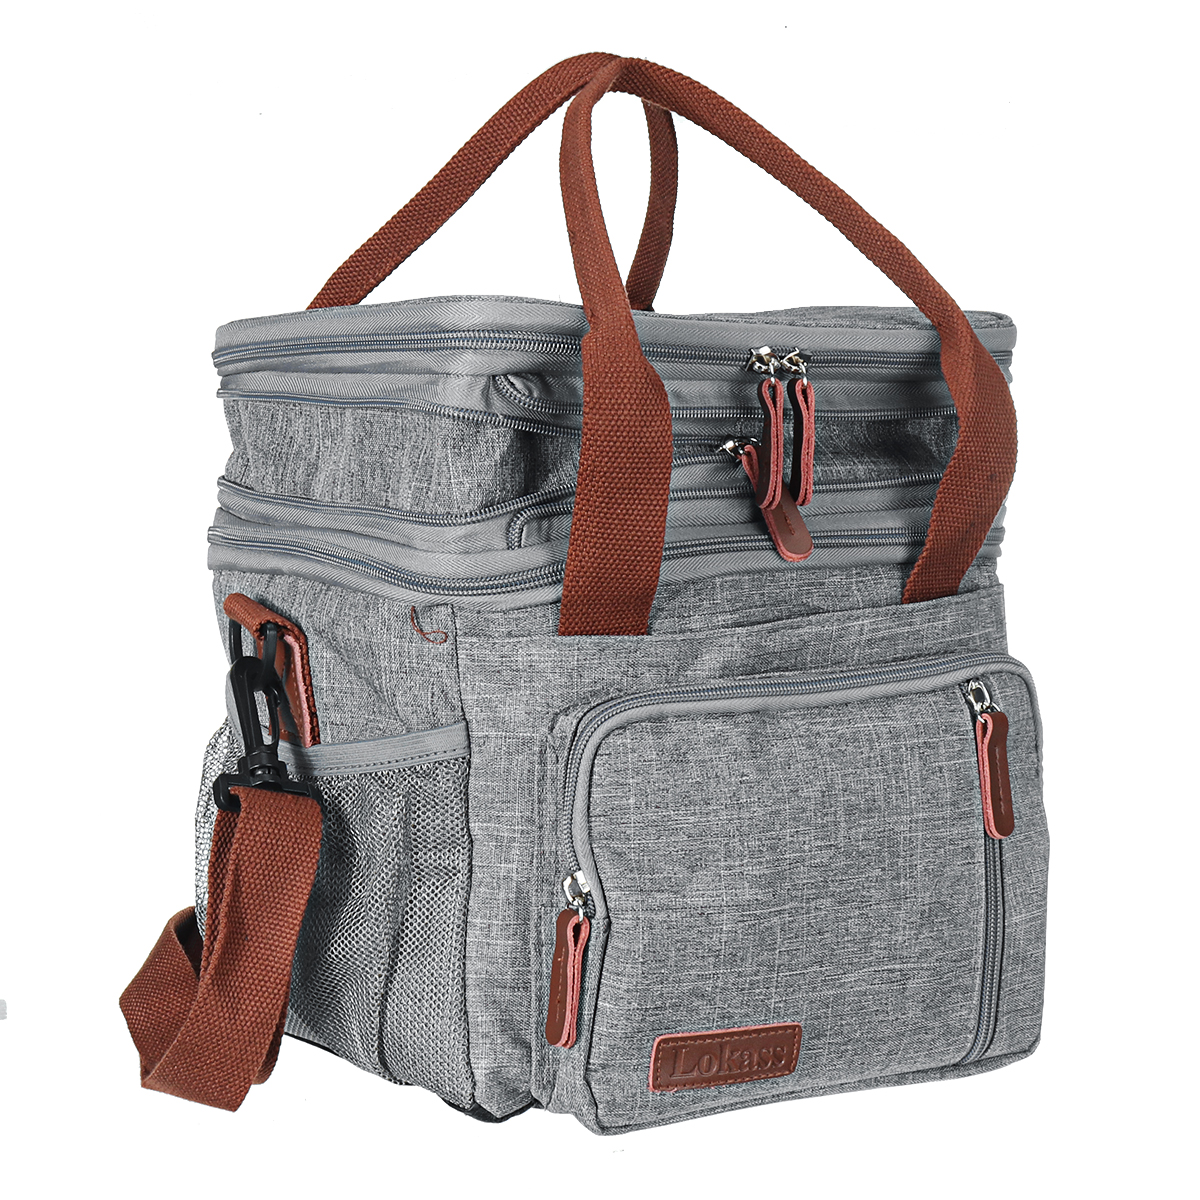 Expandable-Large-Capacity-with-Multiple-Pockets-Leak-proof-Drinks-Lunch-Insulated-Bag-Picnic-Storage-1863622-3